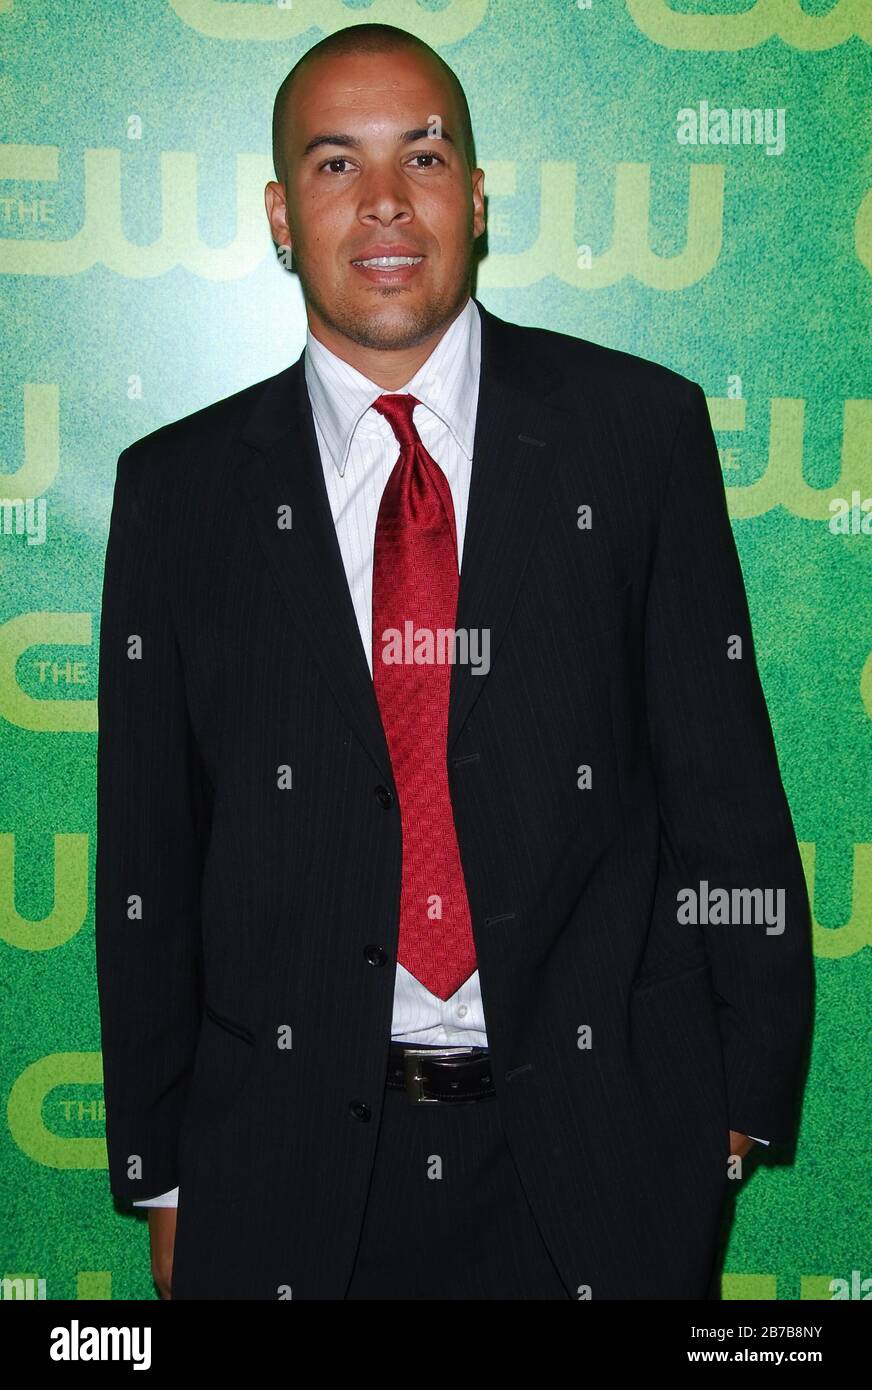 Coby Bell at The CW Television Network 2006 TCA Summer Press Tour - Day Arrivals held at the Ritz Carlton Hotel in Pasadena, CA. The event took place on Monday, July 17, 2006.  Photo by: SBM / PictureLux Stock Photo